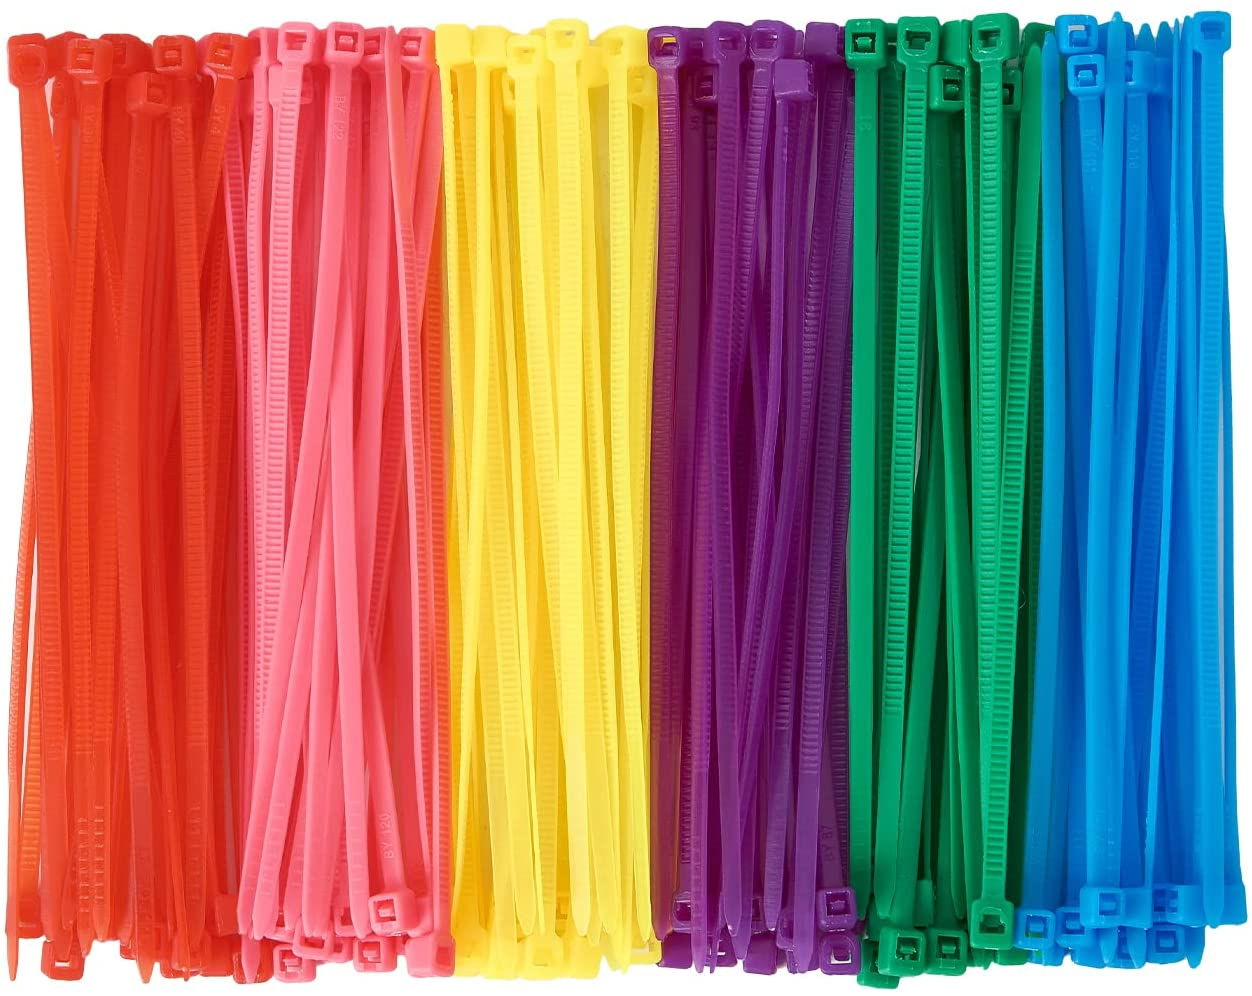 600Pcs (100 per Color) Small Colored Zip Ties 4 Inch Multi-Color Zip Wire Tie for Deco Mesh Wreath Supplies, Colorful Plastic Ties Yellow, Blue, Red, Green, Pink, Purple Zip Ties